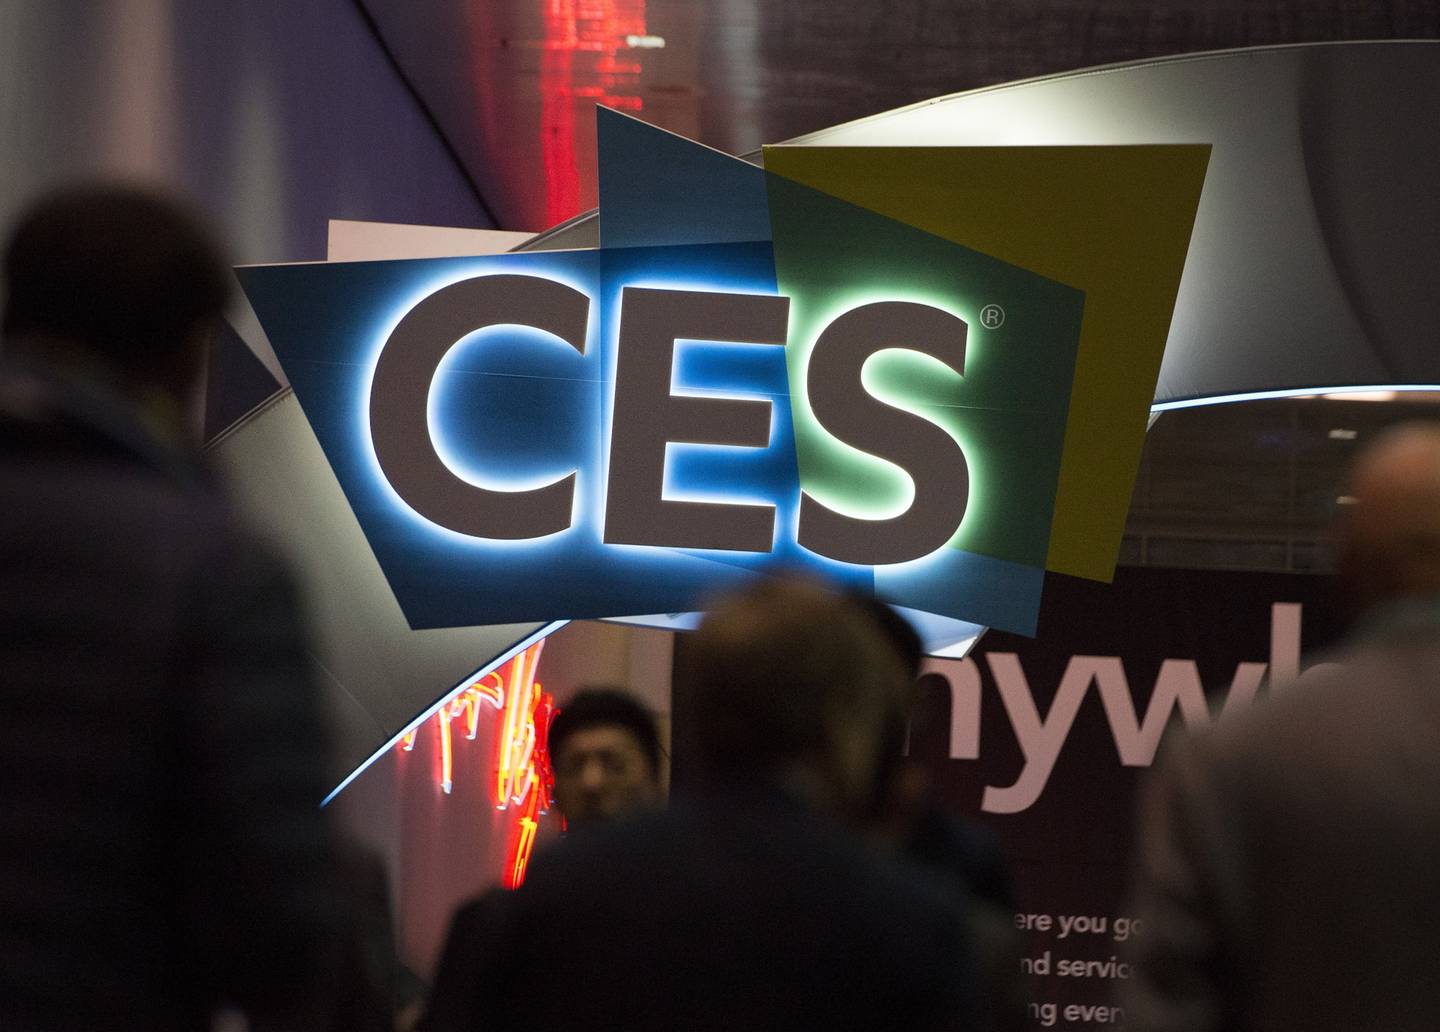 Attendees walk past signage during CES 2020 in Las Vegas, Nevada, U.S., on Wednesday, Jan. 8, 2020.